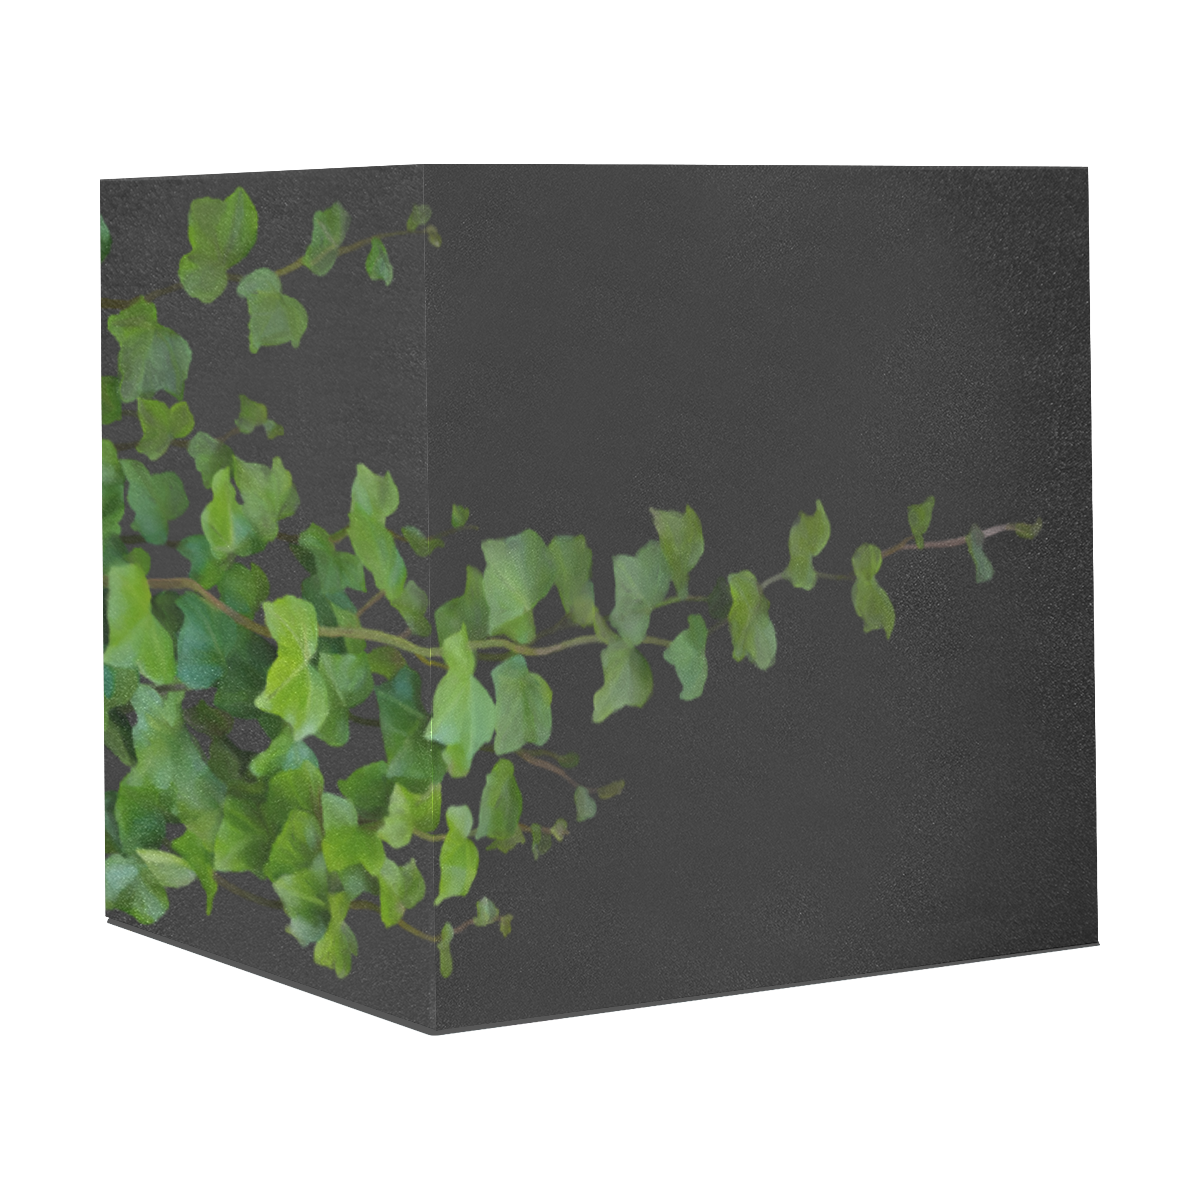 Vines, climbing plant watercolor - black Gift Wrapping Paper 58"x 23" (5 Rolls)